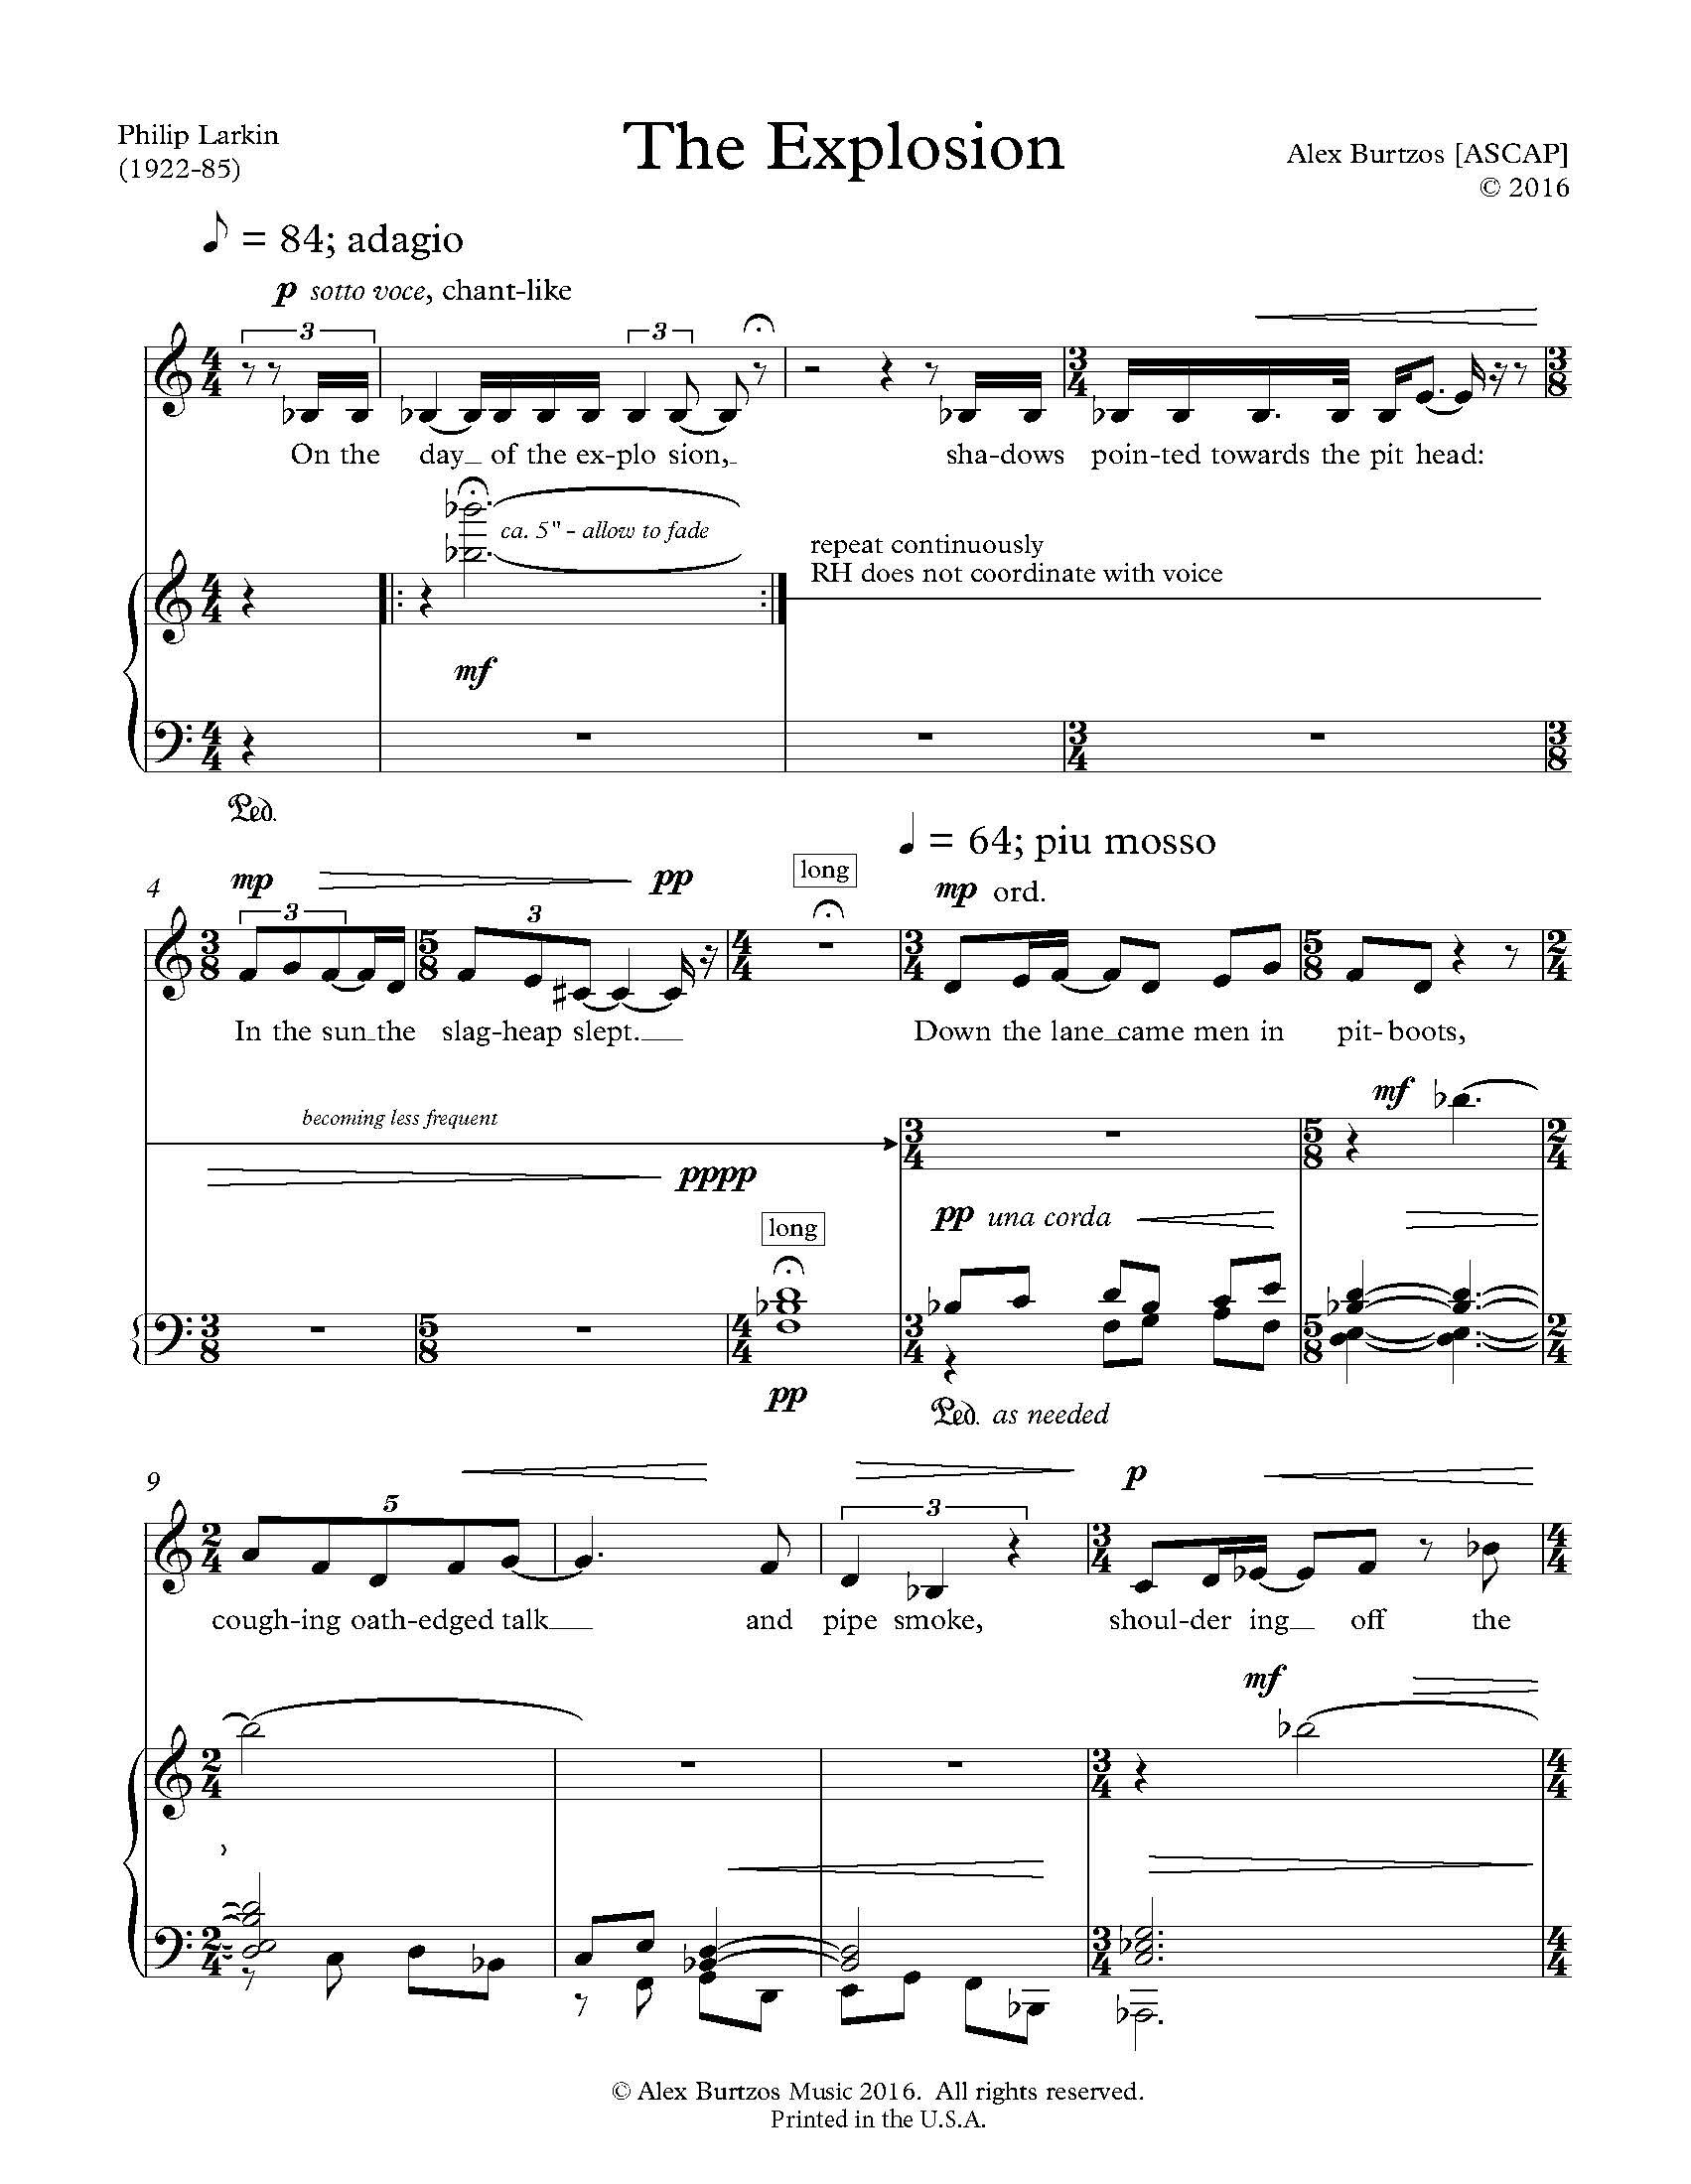 The Explosion - Complete Score_Page_07.jpg